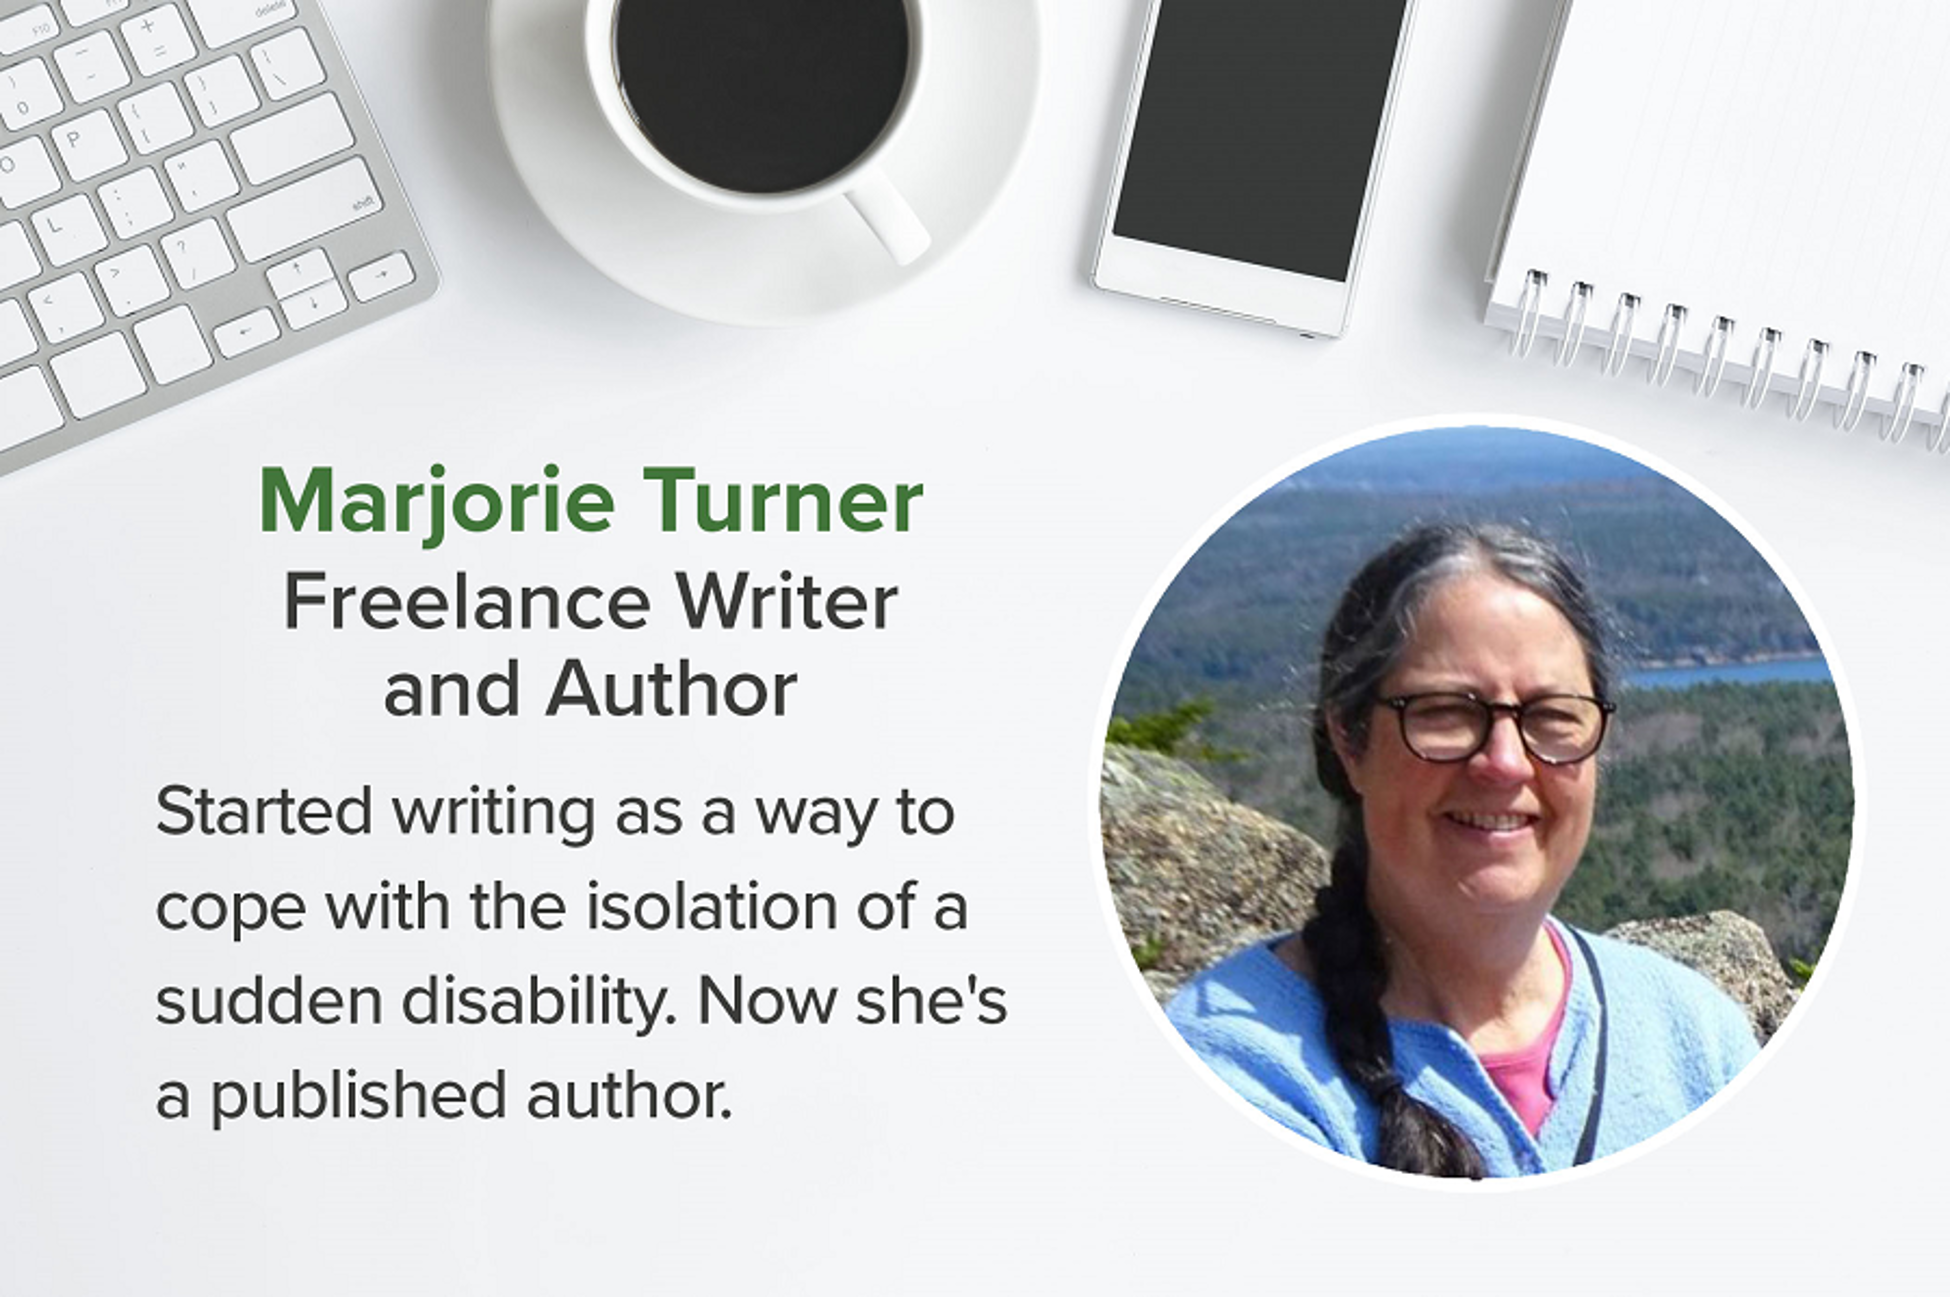 Marjorie Turner freelance writer and author